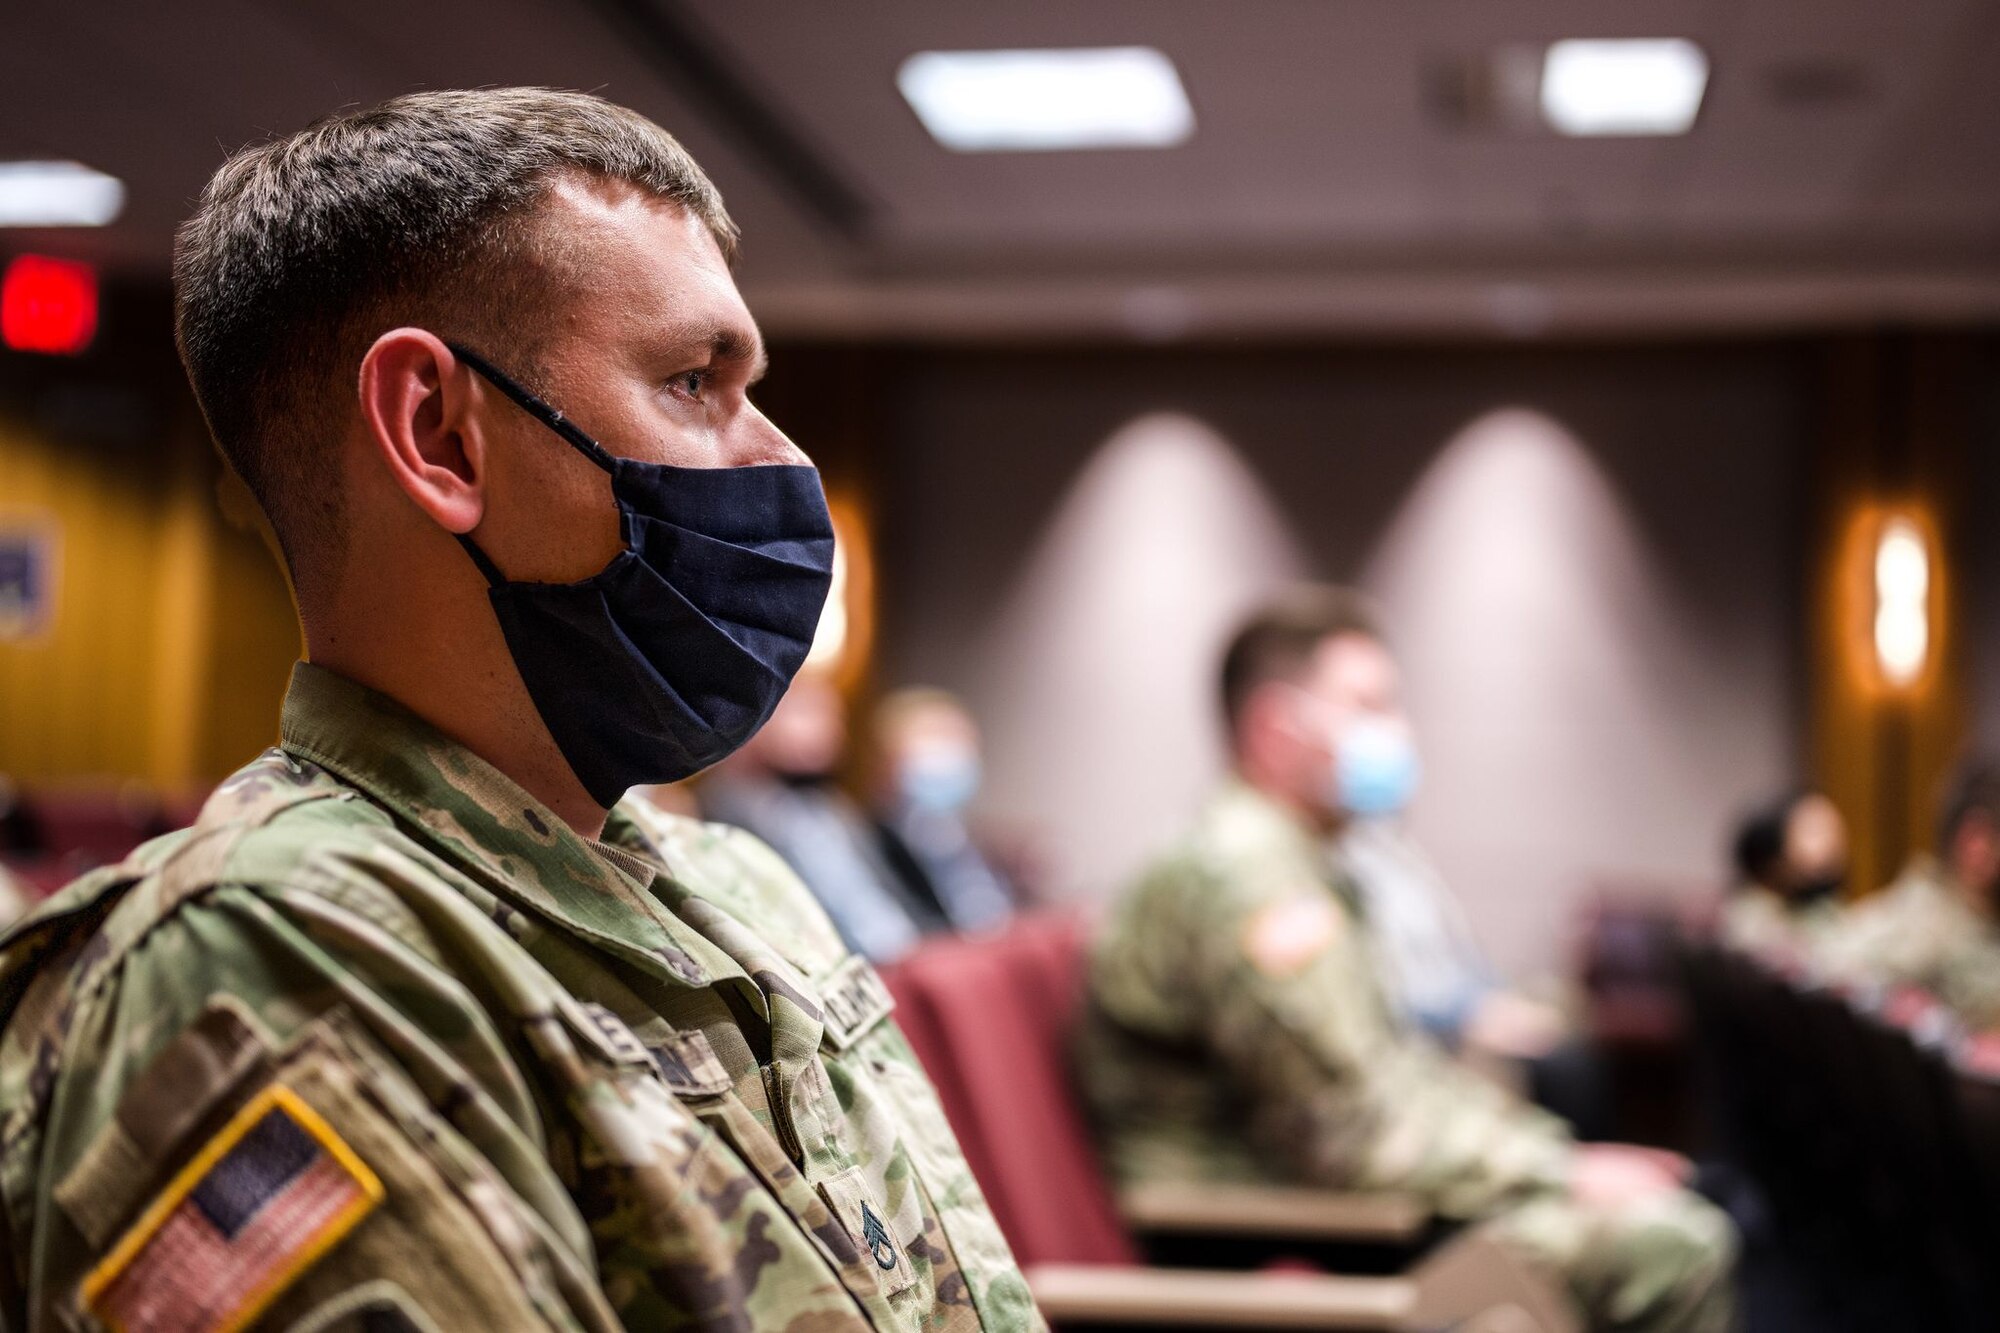 A military member in a uniform sits in a conference room